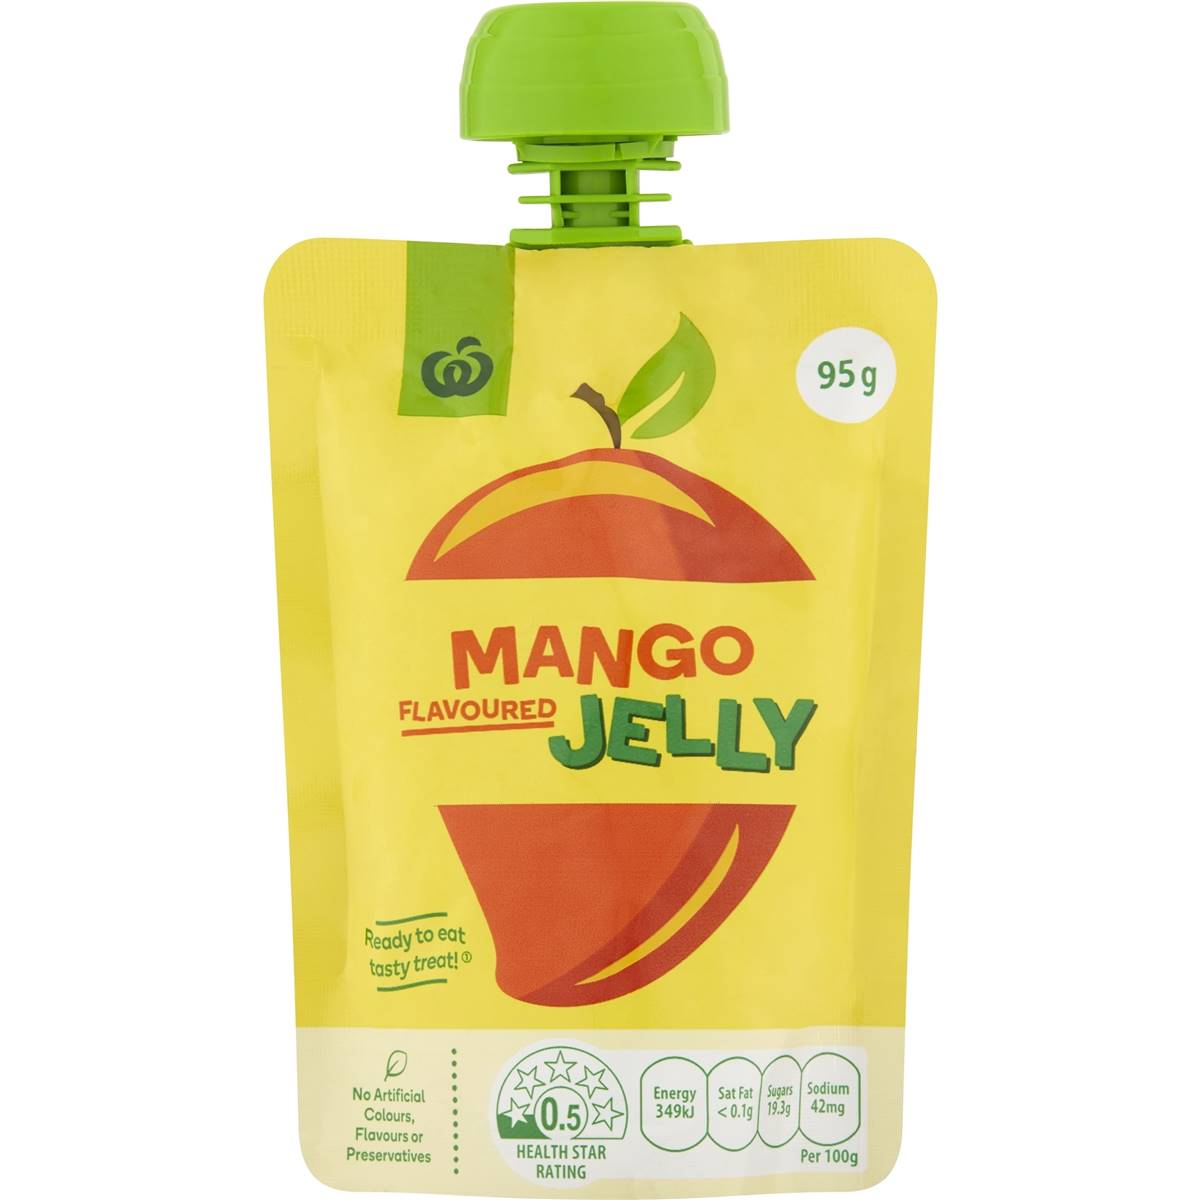 Calories in Woolworths Mango Flavoured Jelly In Pouch